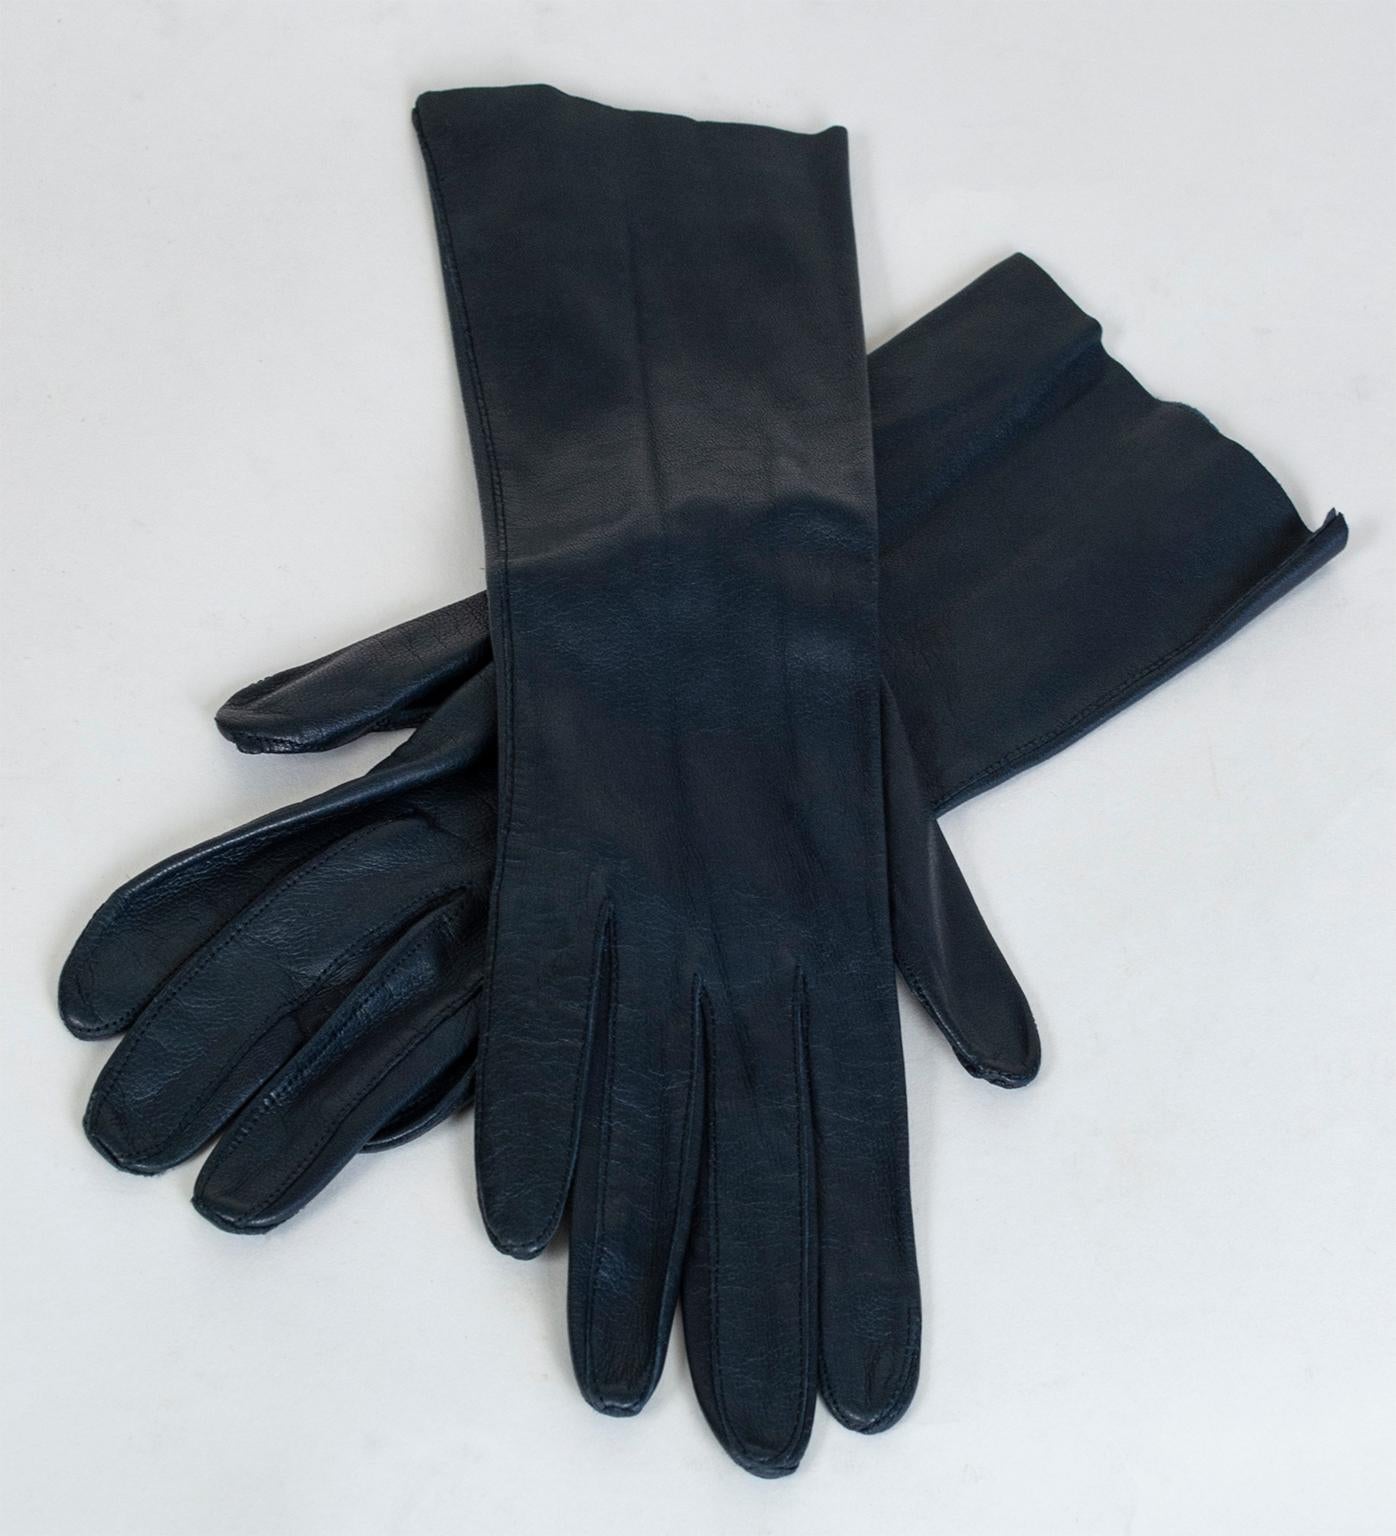 An easy way to elevate the sophistication of any outfit, the right gloves can be both beautiful and functional. In hard-to-find dark navy kidskin leather, this pair fits like a second skin and terminates at the middle forearm, making them ideal for